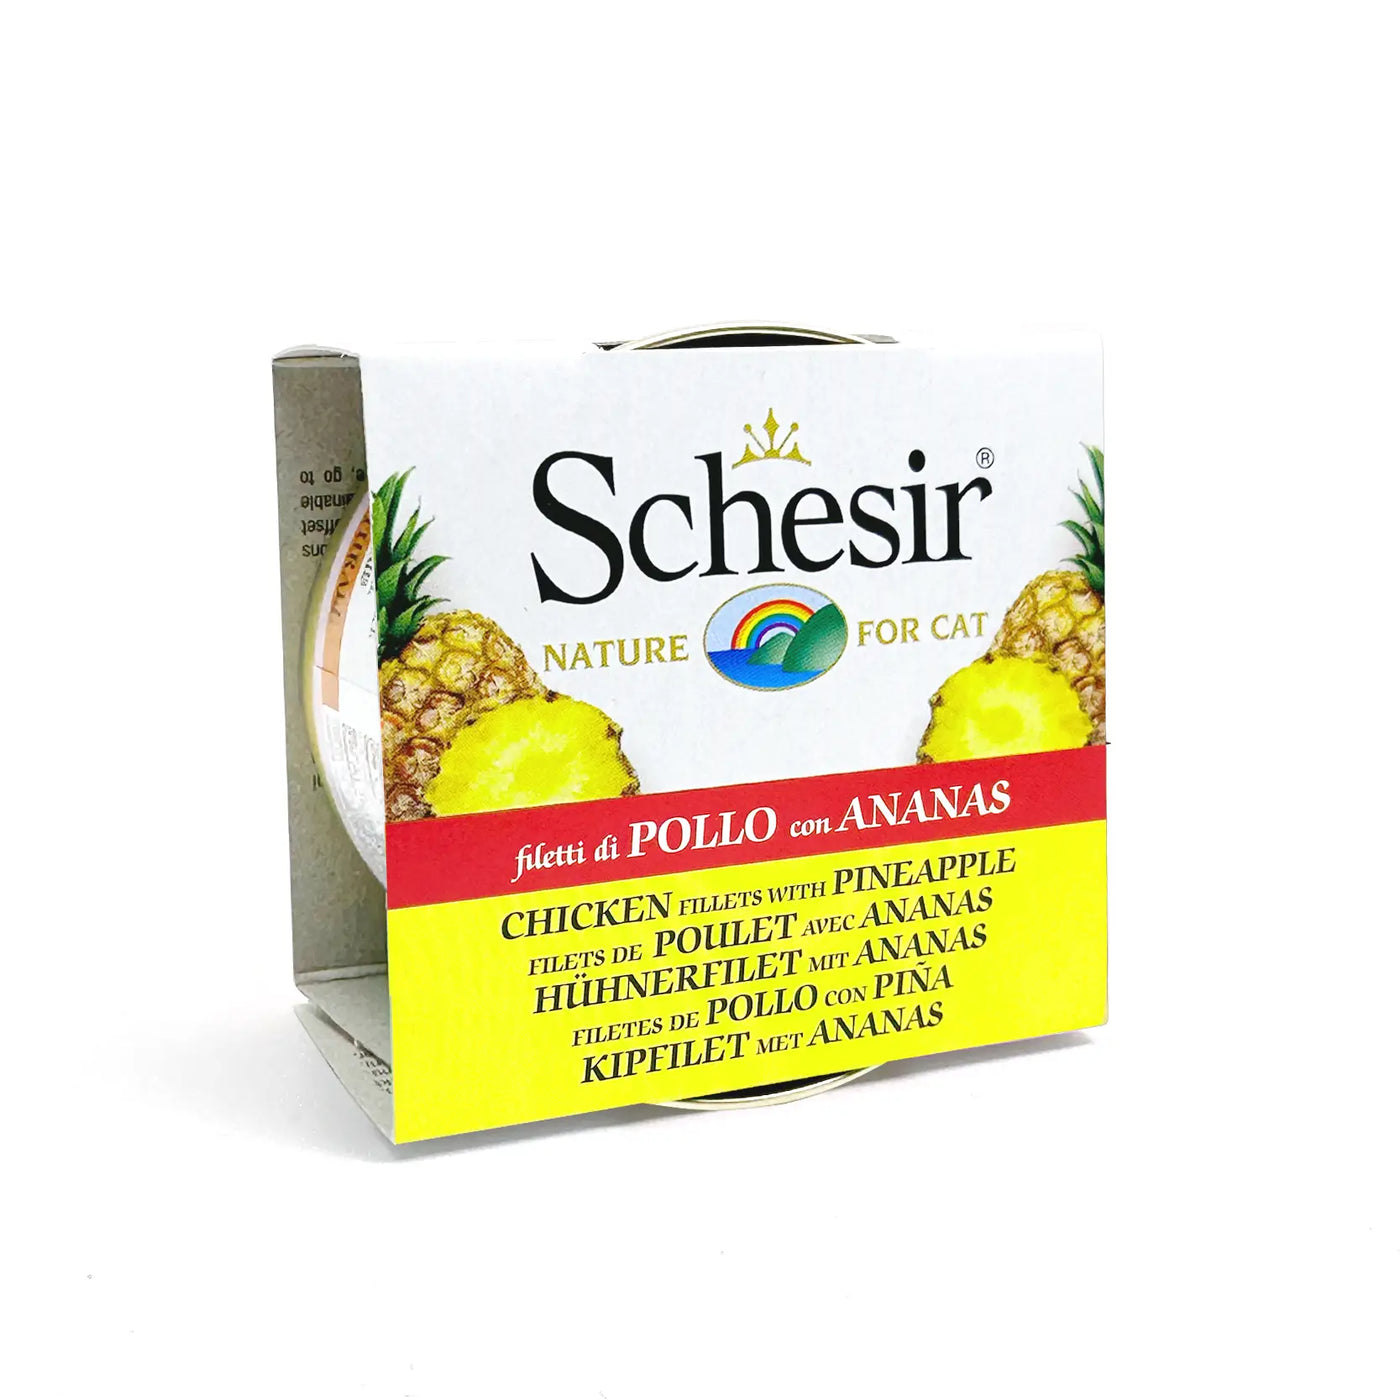 Schesir - Complementary Wet Food for Adult Cats - Chicken Fillets with Pineapple 85g